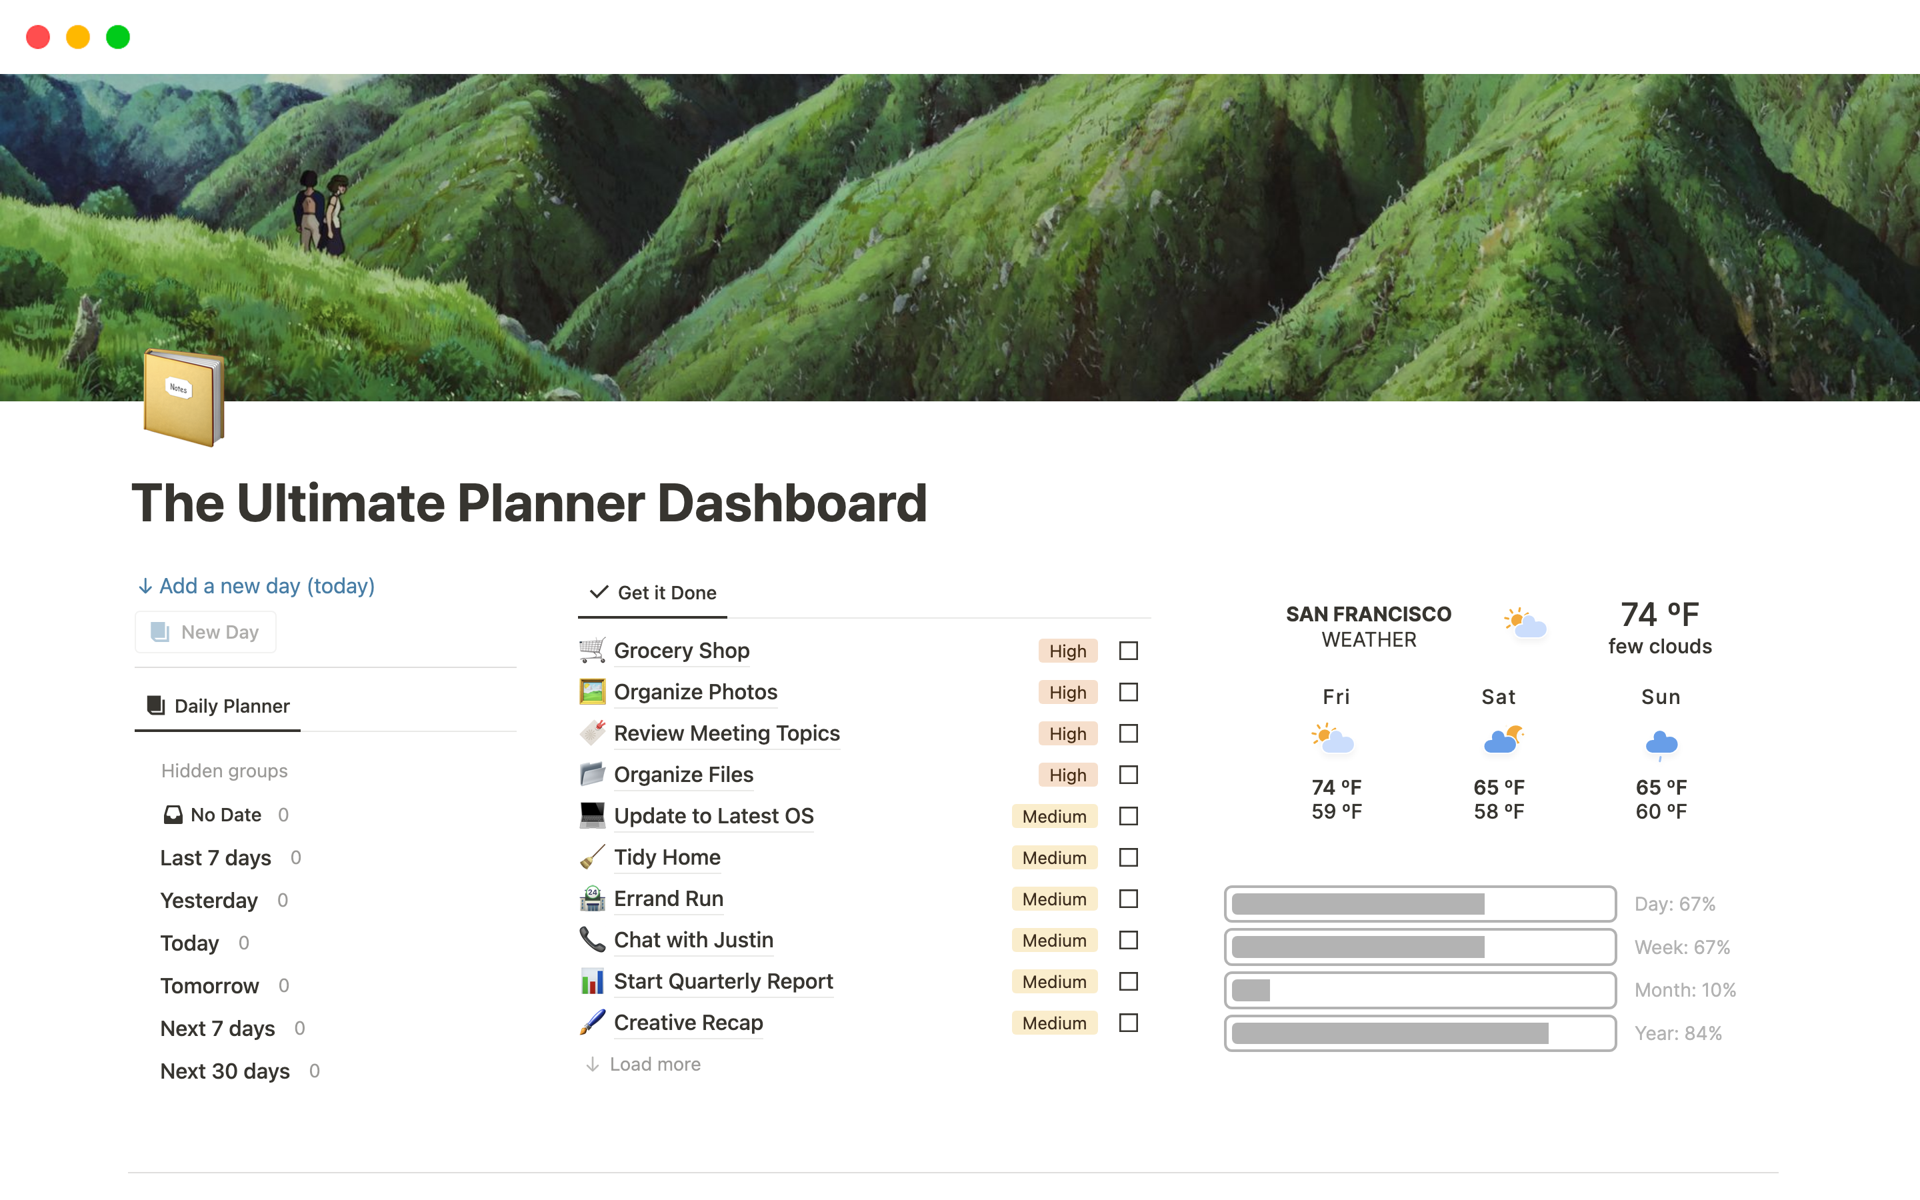 The Ultimate Planner Dashboard by Gridfitiのテンプレートのプレビュー